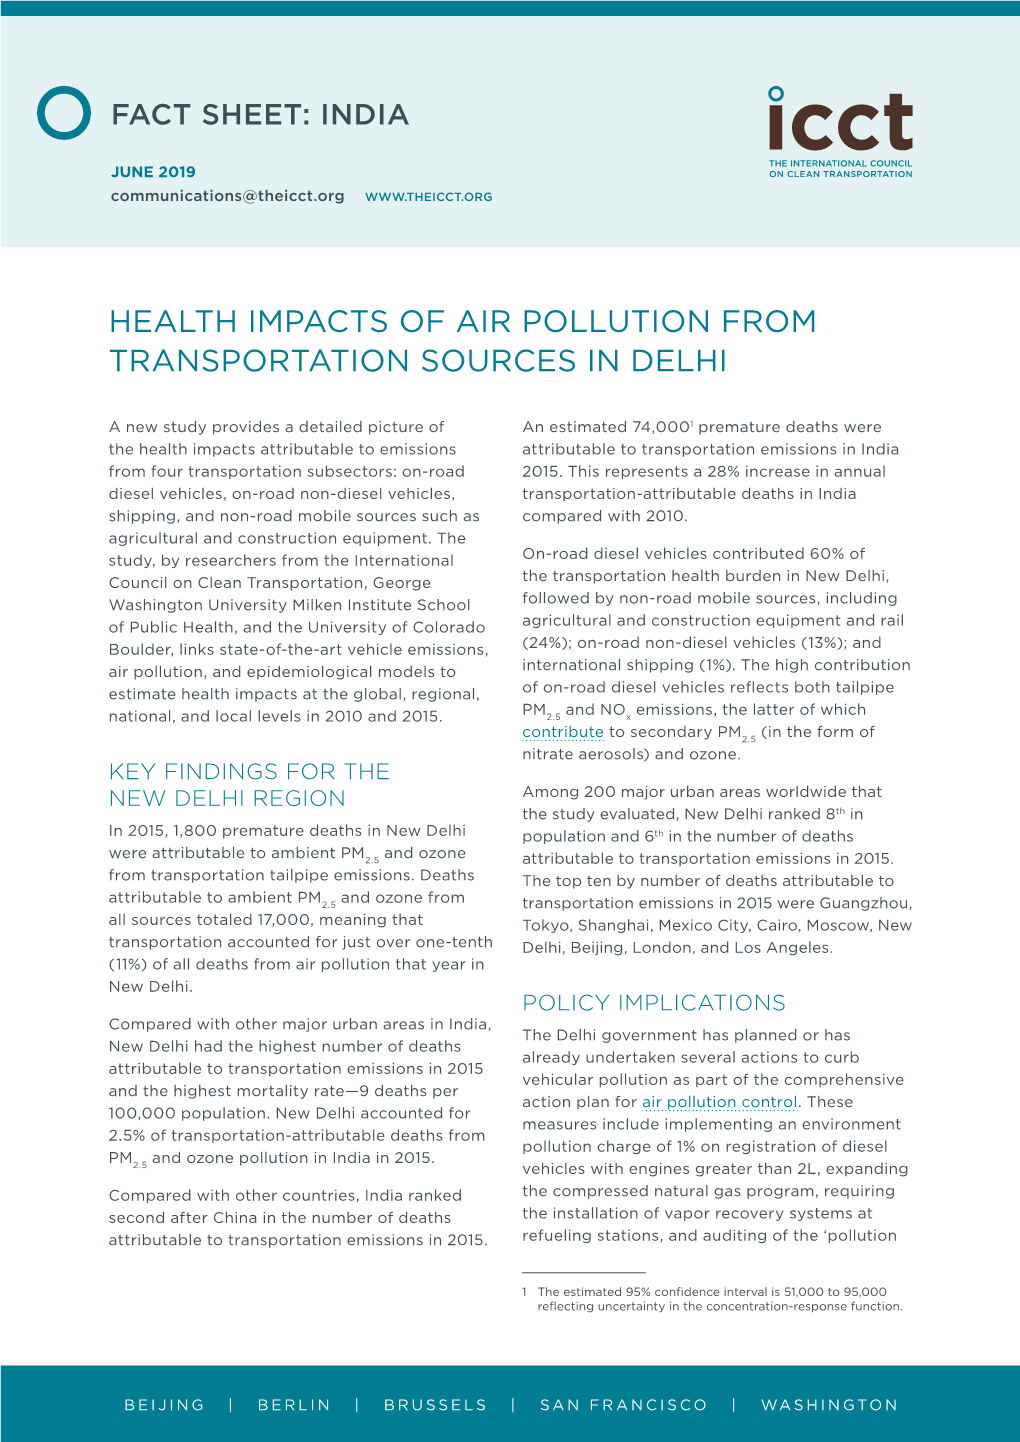 Health Impacts of Air Pollution in Delhi